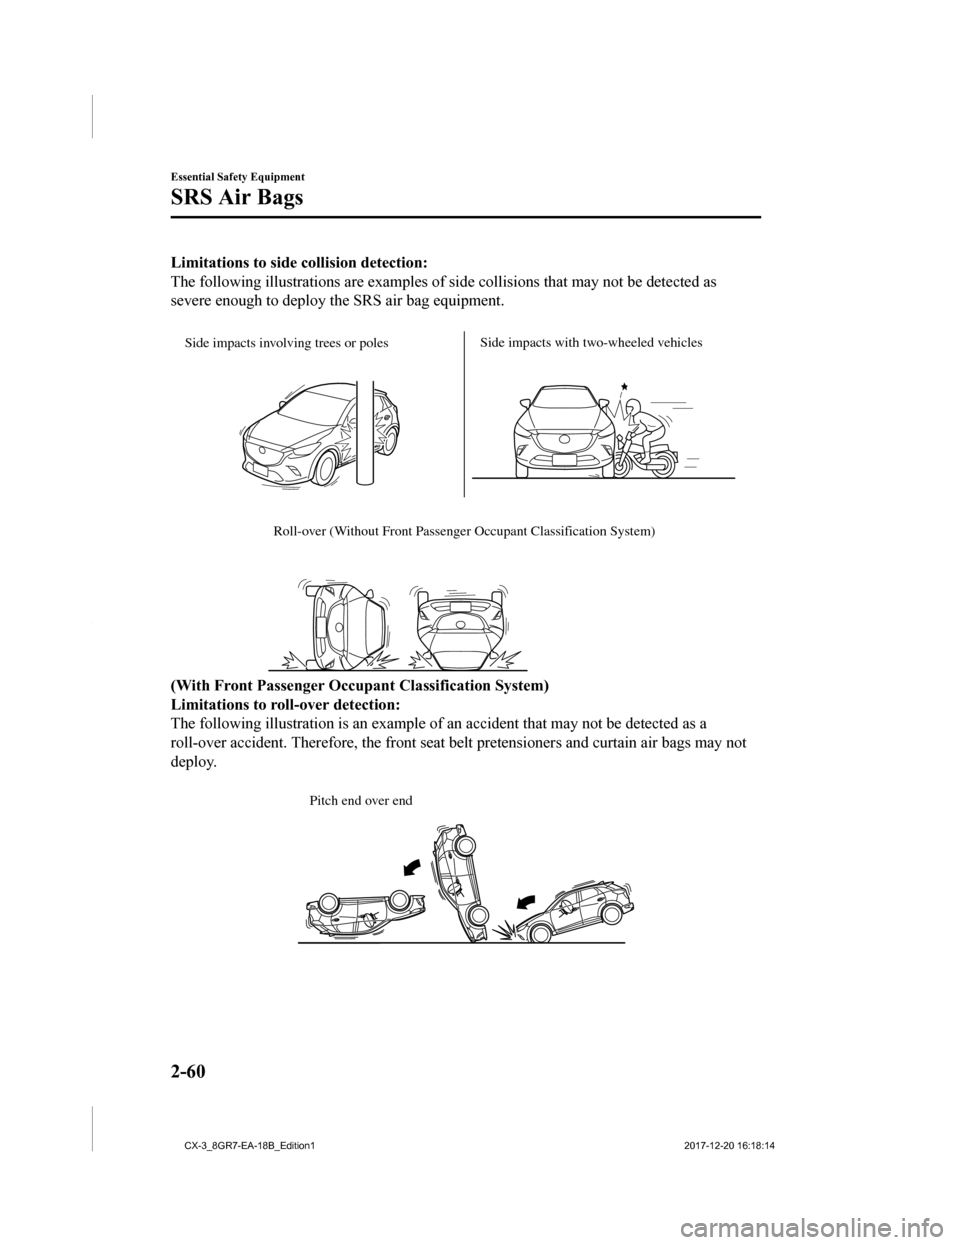 MAZDA MODEL CX-3 2019  Owners Manual (in English) Limitations to side collision detection:
The following illustrations are e xamples of side collisions that may not be detected as
severe enough to deploy the SRS air bag equipment.
 
Side impacts invo